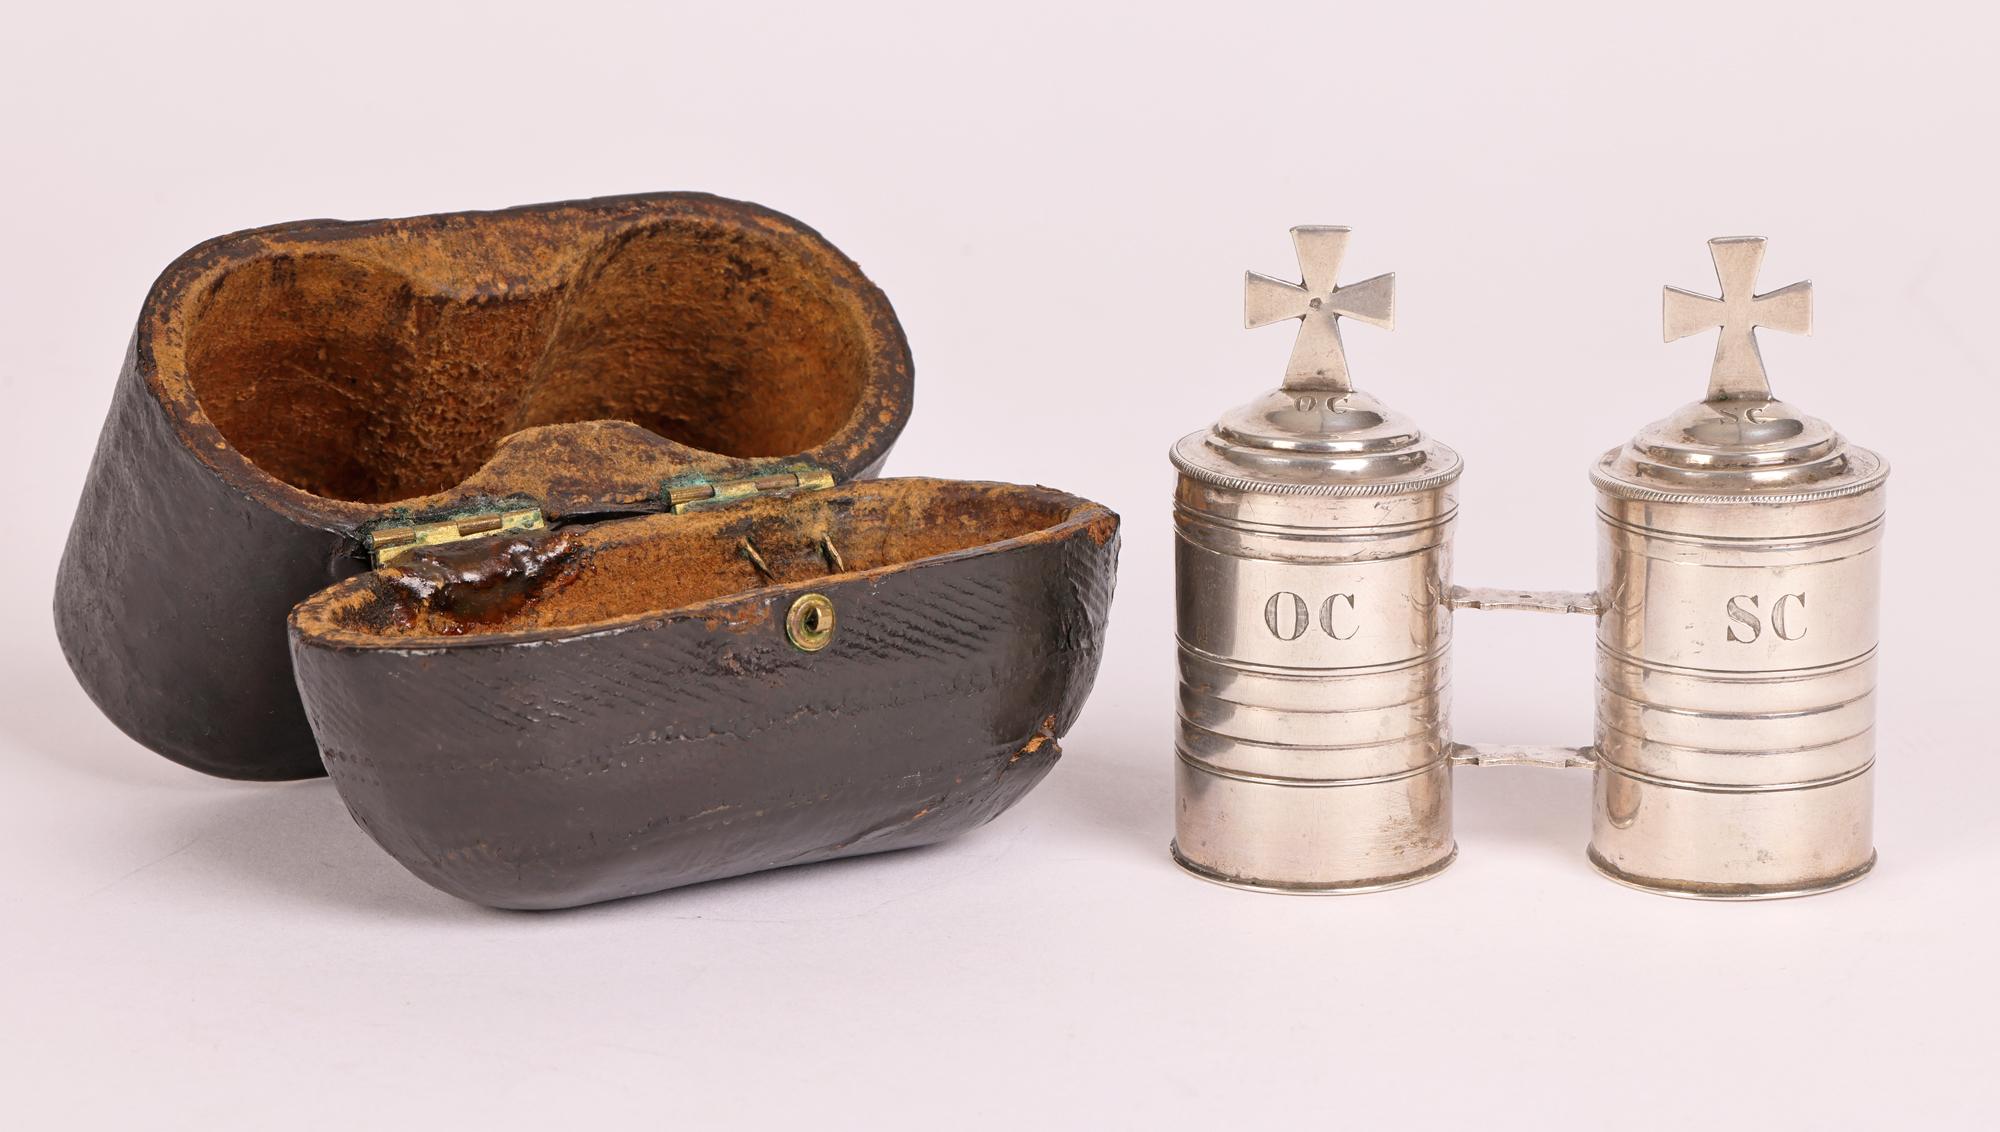 A very fine and scarce French pair silver Baptismal oil containers in its original leather fitted travelling case dating from 1850. The two cylindrical shaped oil containers are conjoined and both have tight fitting covers mounted with crosses. The